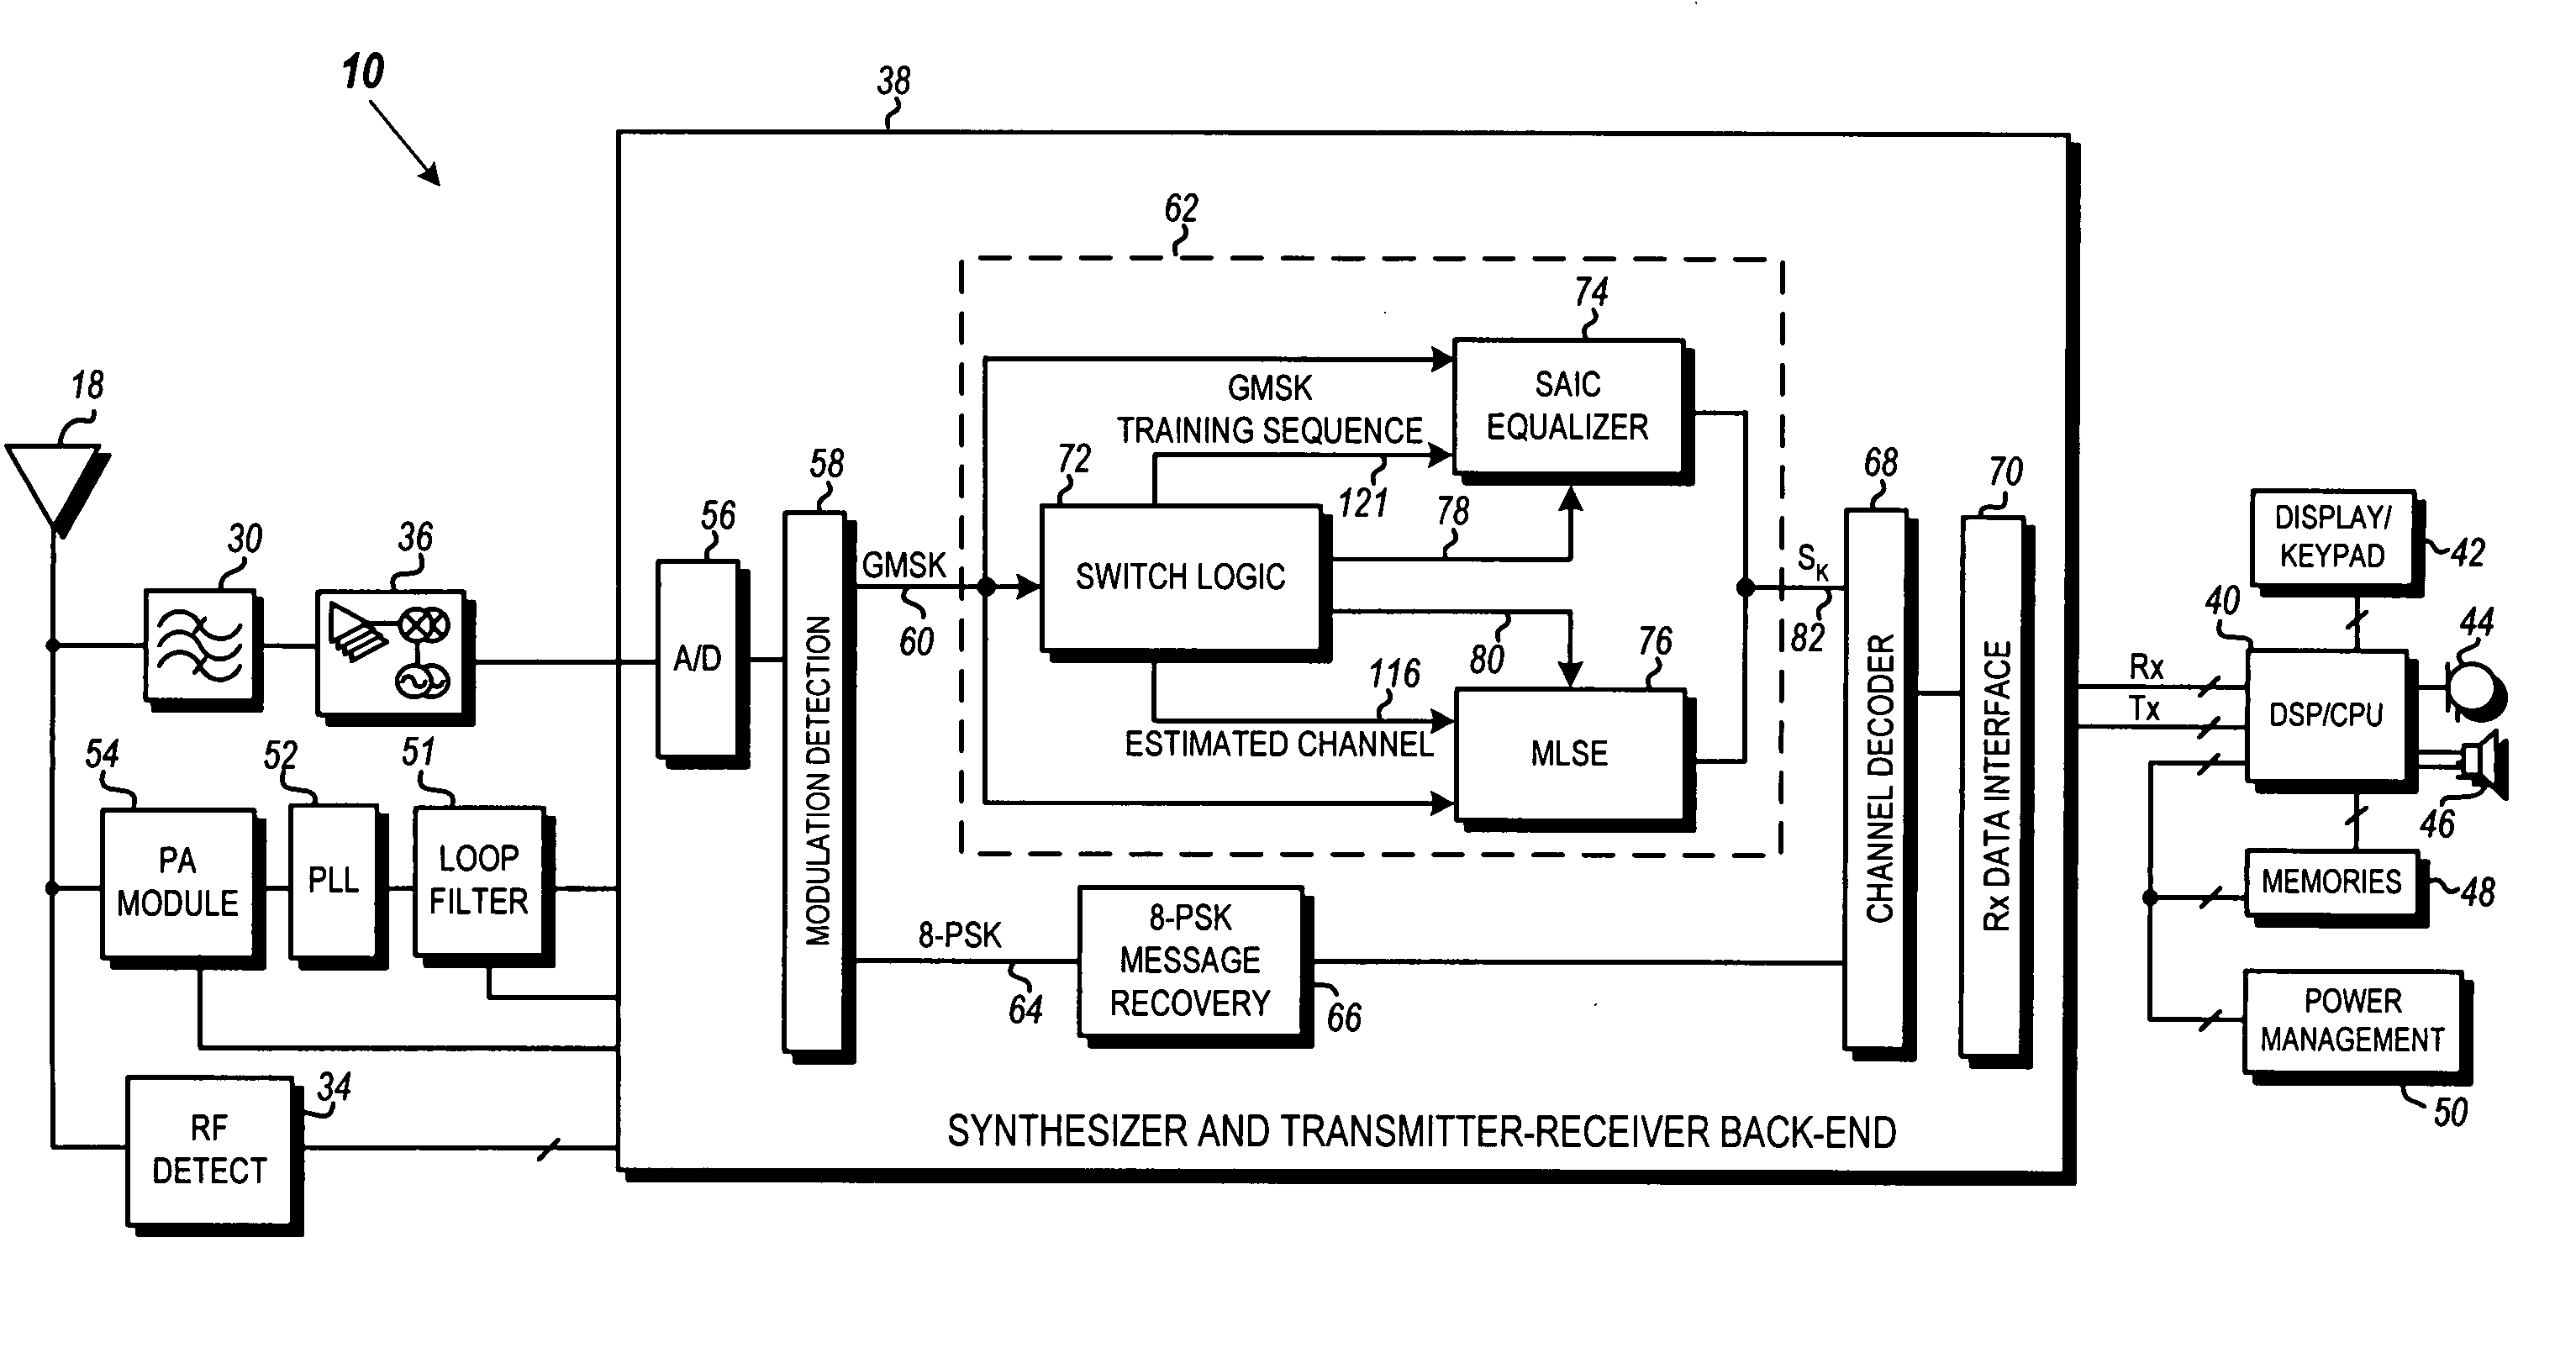 Dynamic switching between MLSE and linear equalizer for single antenna interference cancellation in a GSM communication system